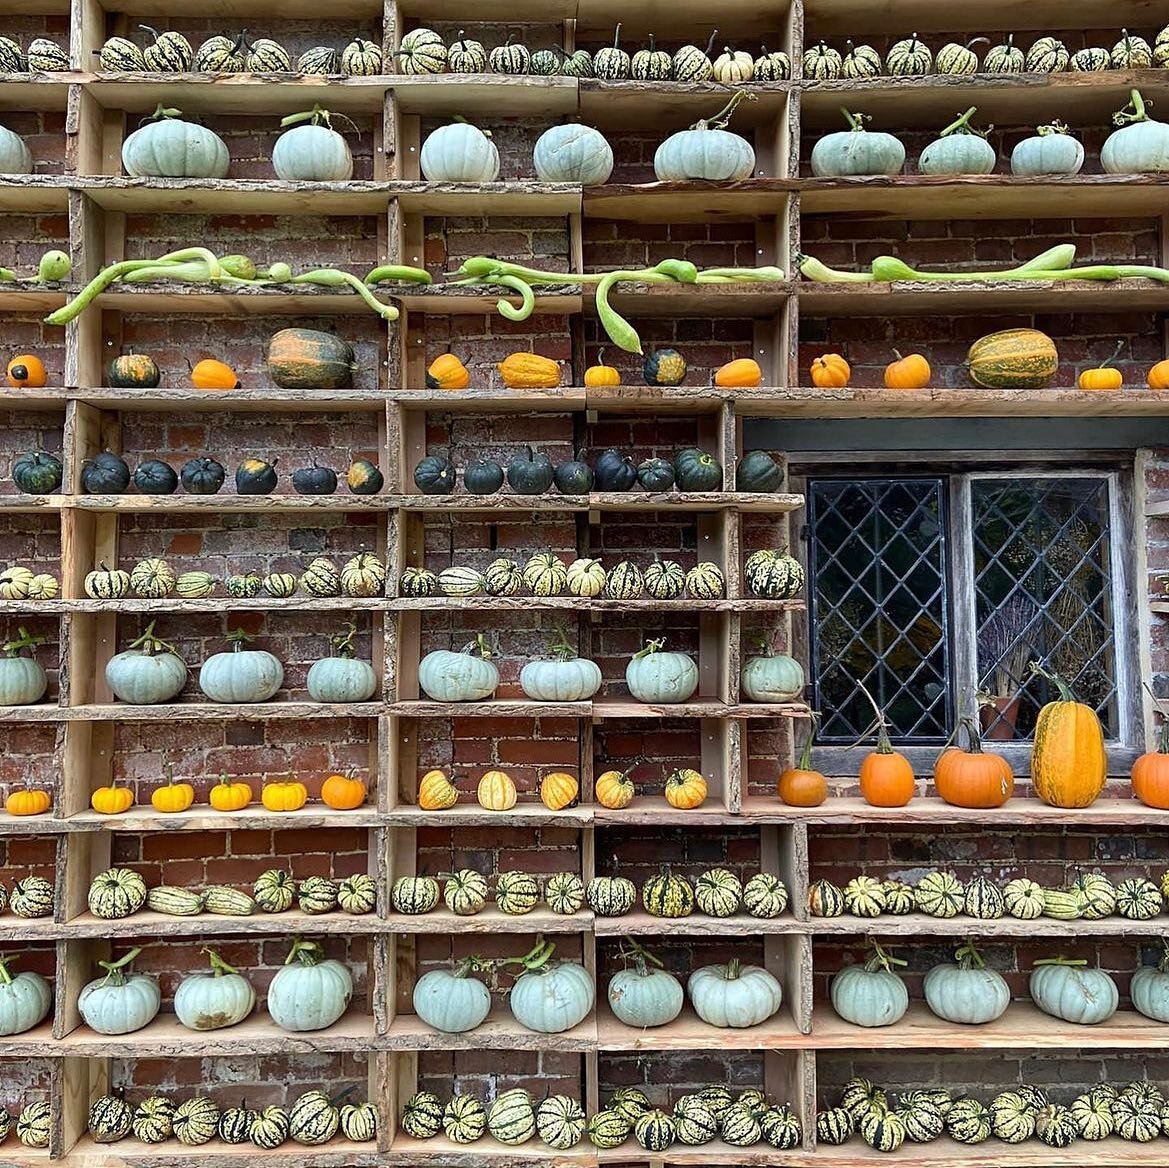 Pumpkins and Squash 🧡
Tis the season and this stunning display needed to be shared. At this time of year there is so much produce to choose from and here is a list to inspire your cooking. November starts today, darker evenings are here and there is